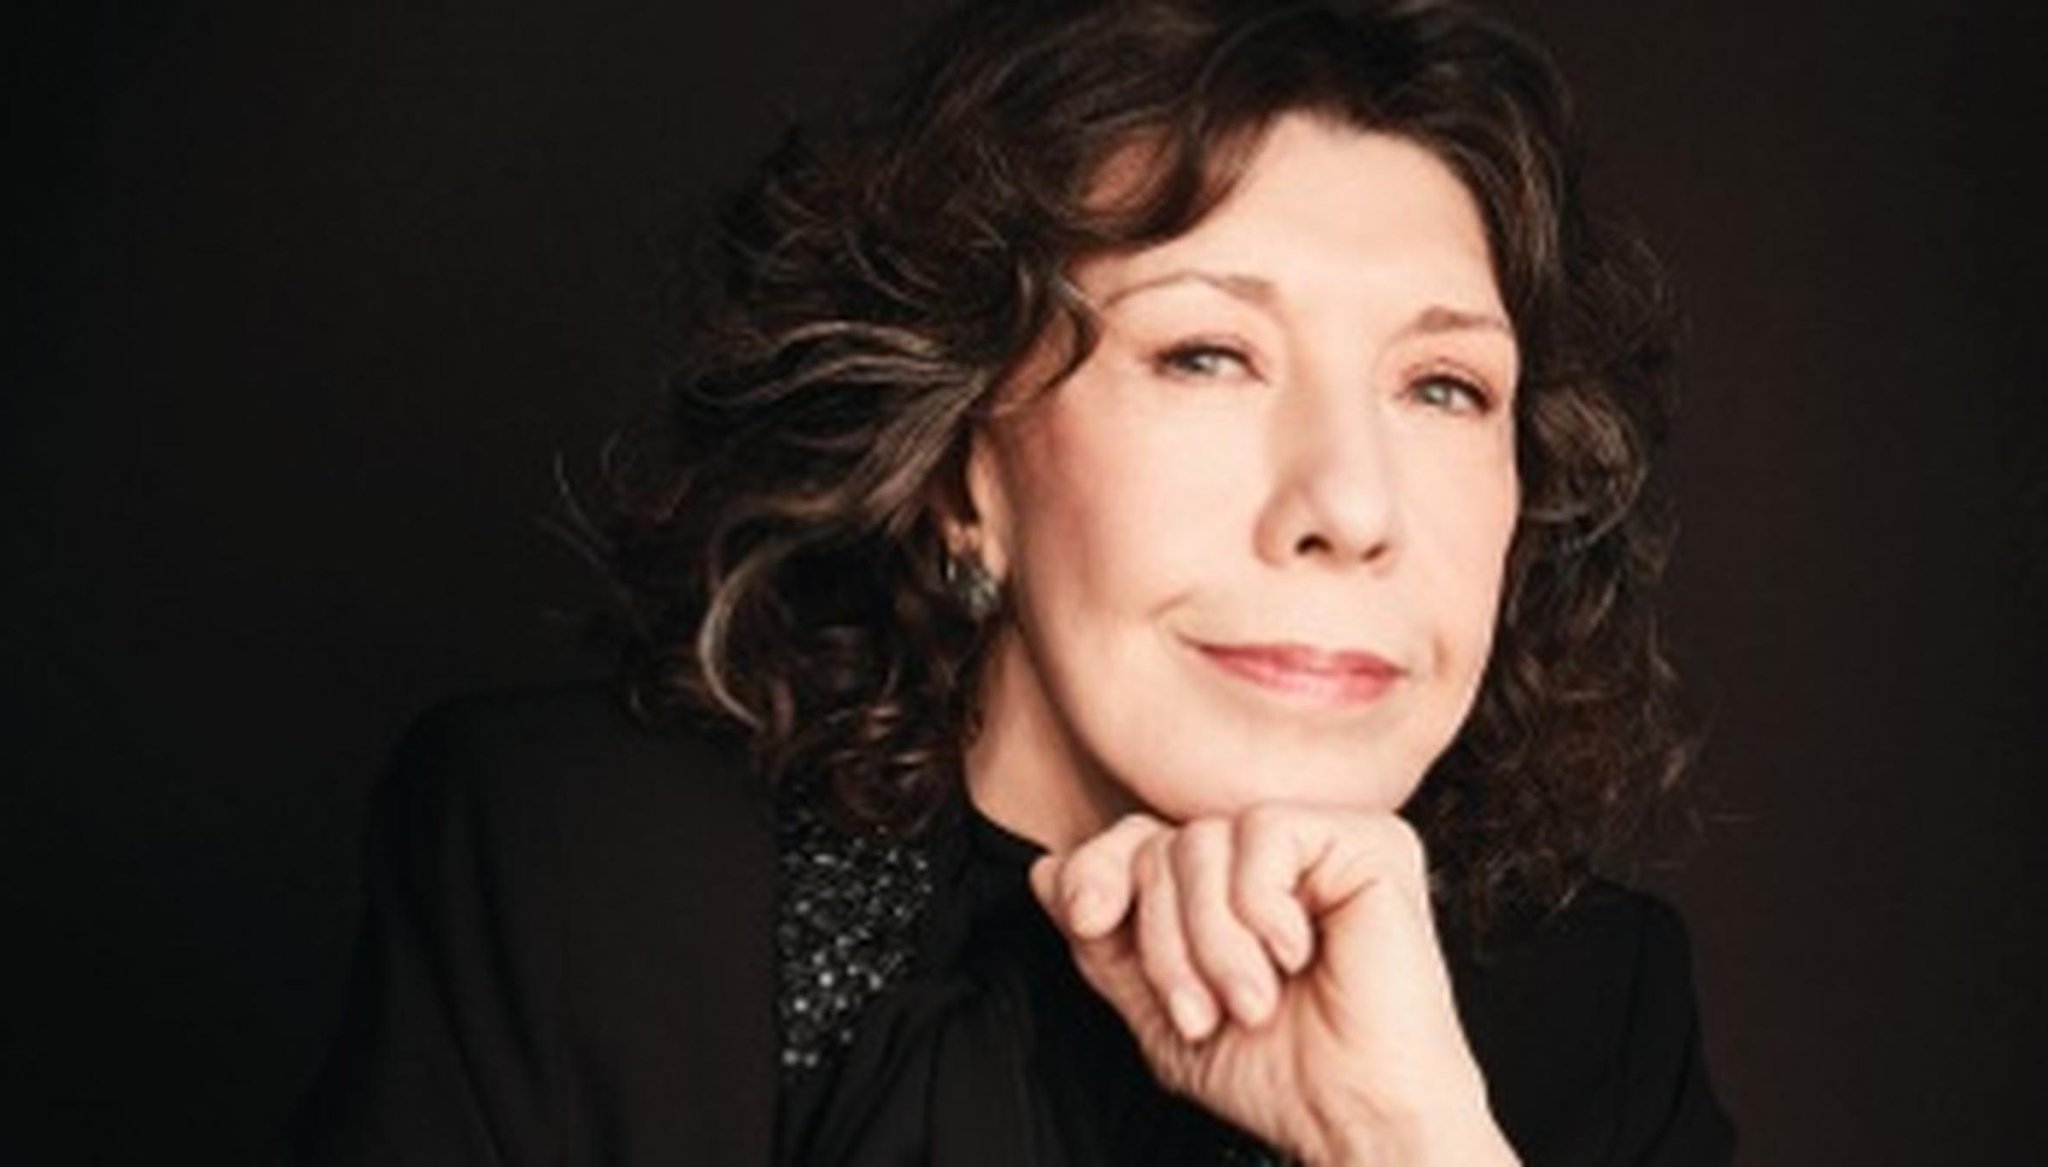 A very happy 80th birthday to Lily Tomlin, born in Detroit on 9/1/39! 